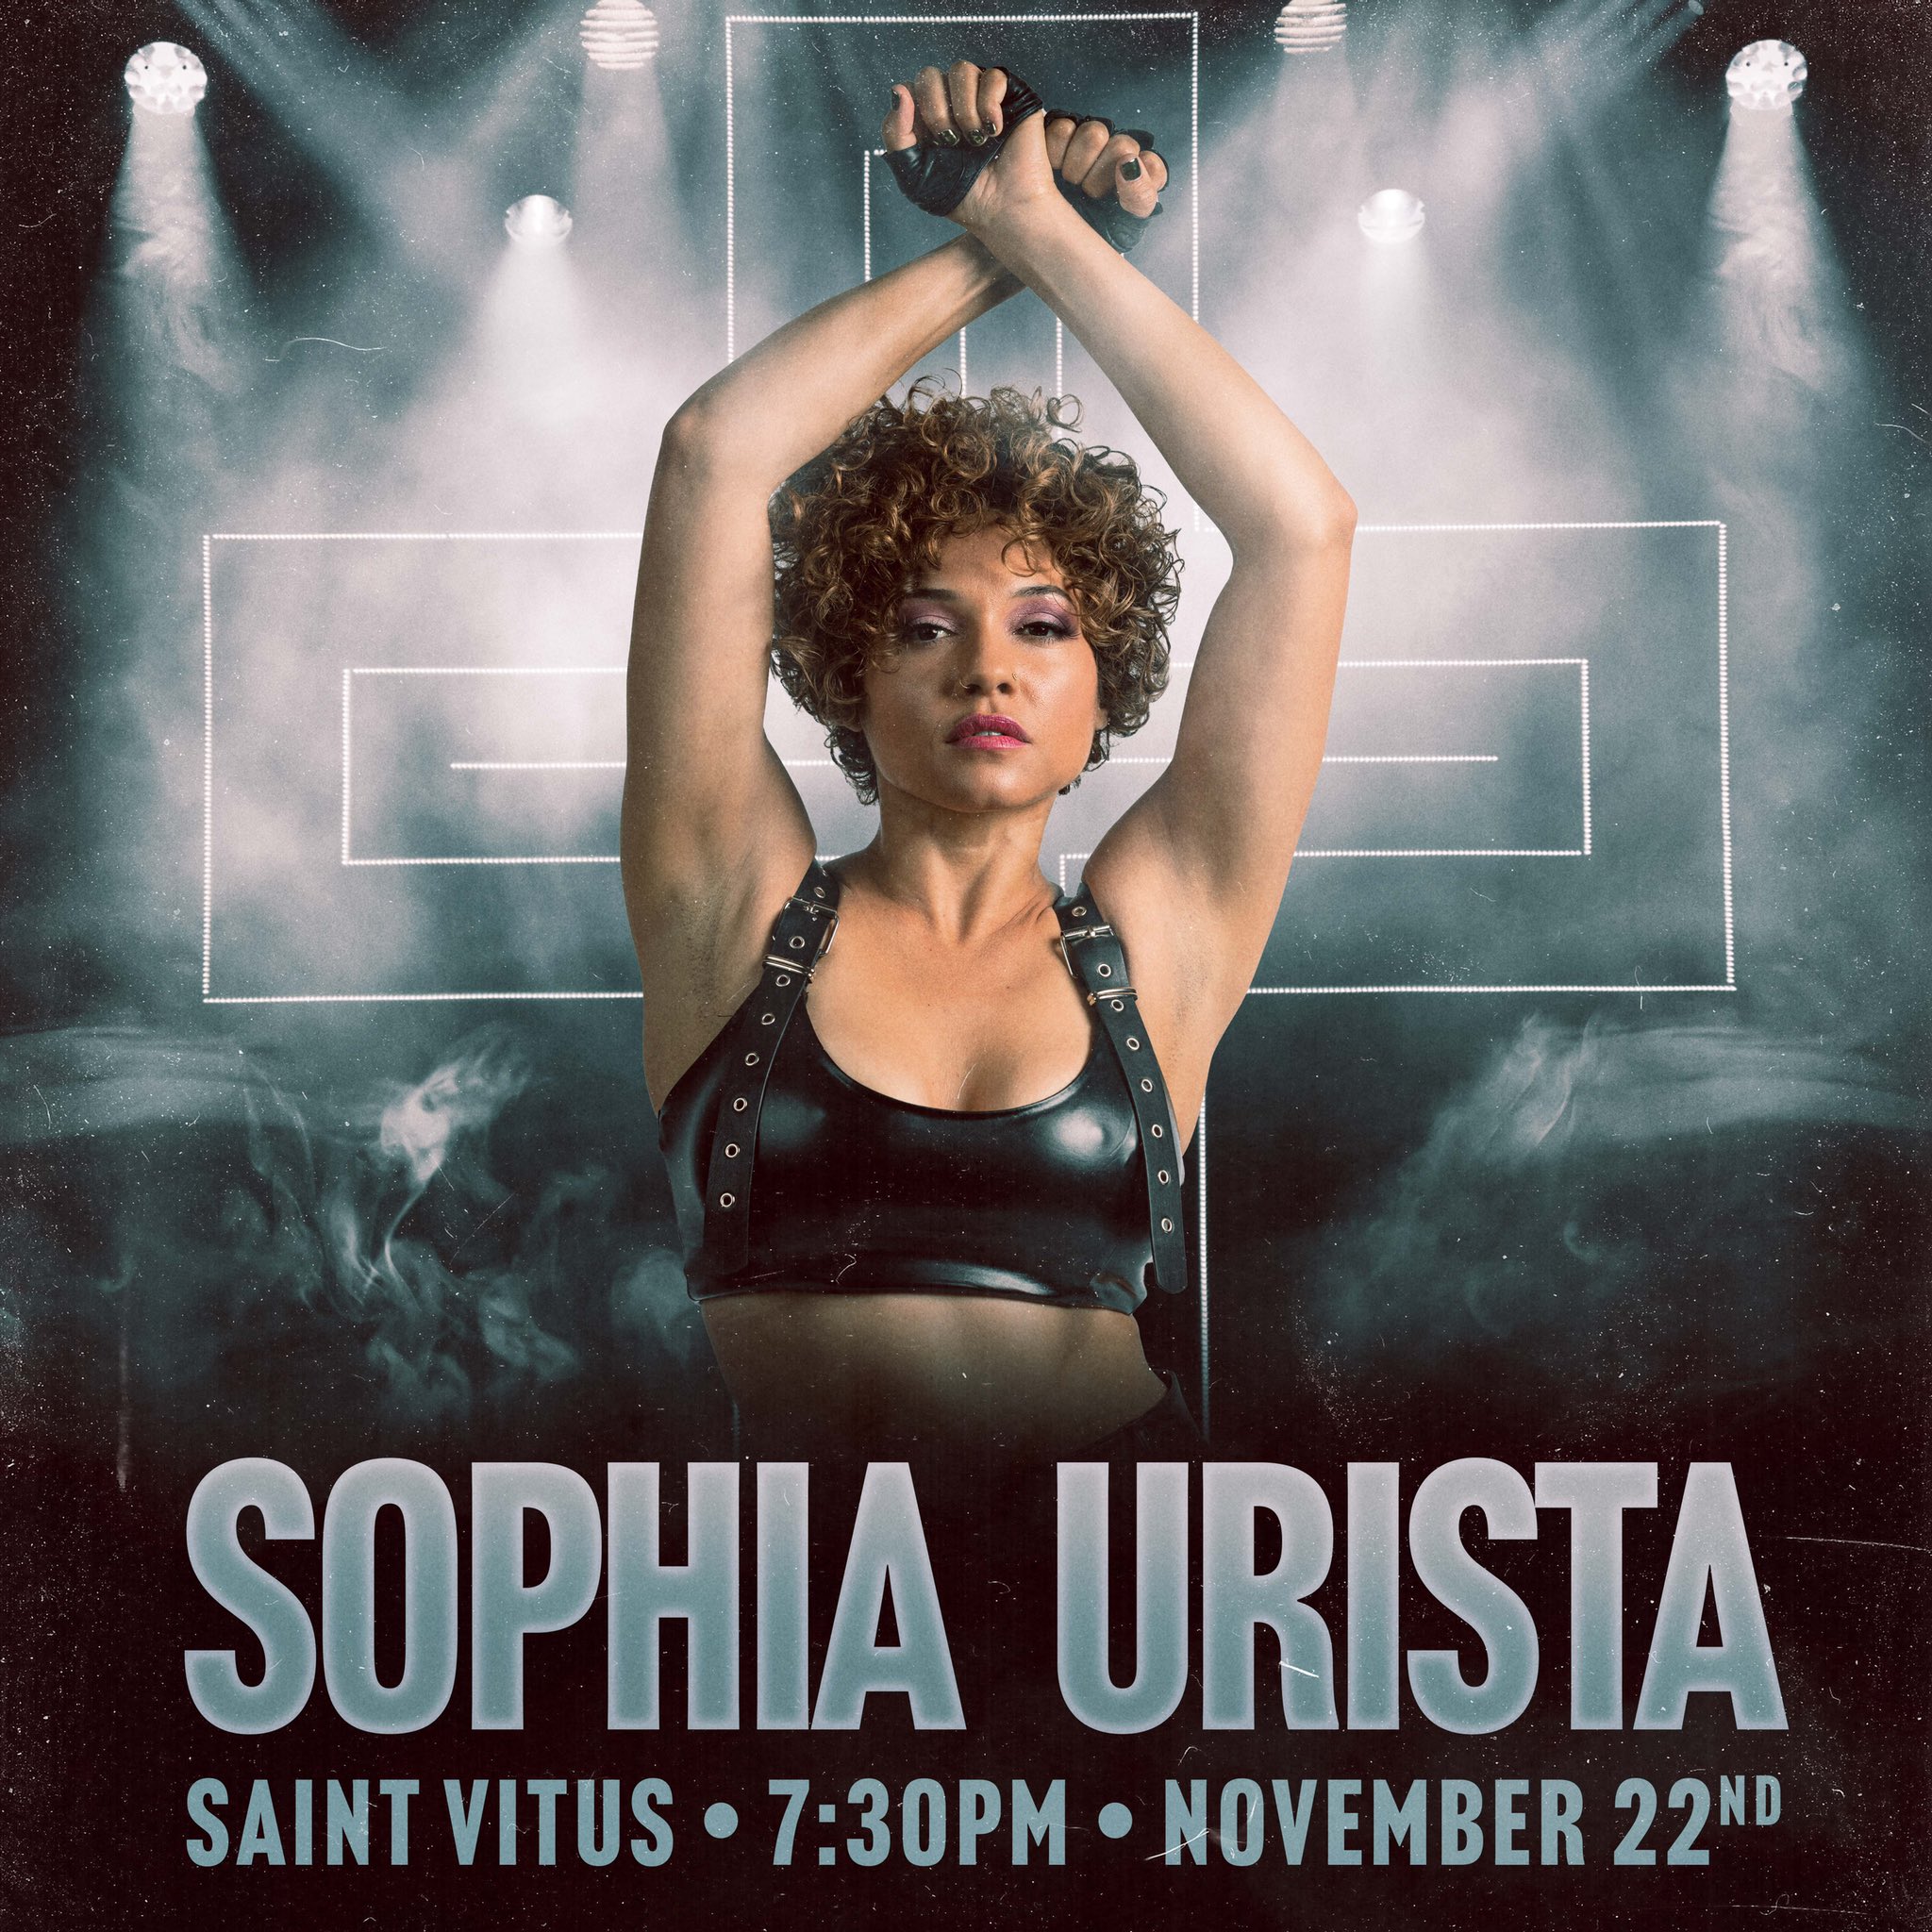 US band singer Sophia Urista apologizes for peeing on a fan’s face during a performance